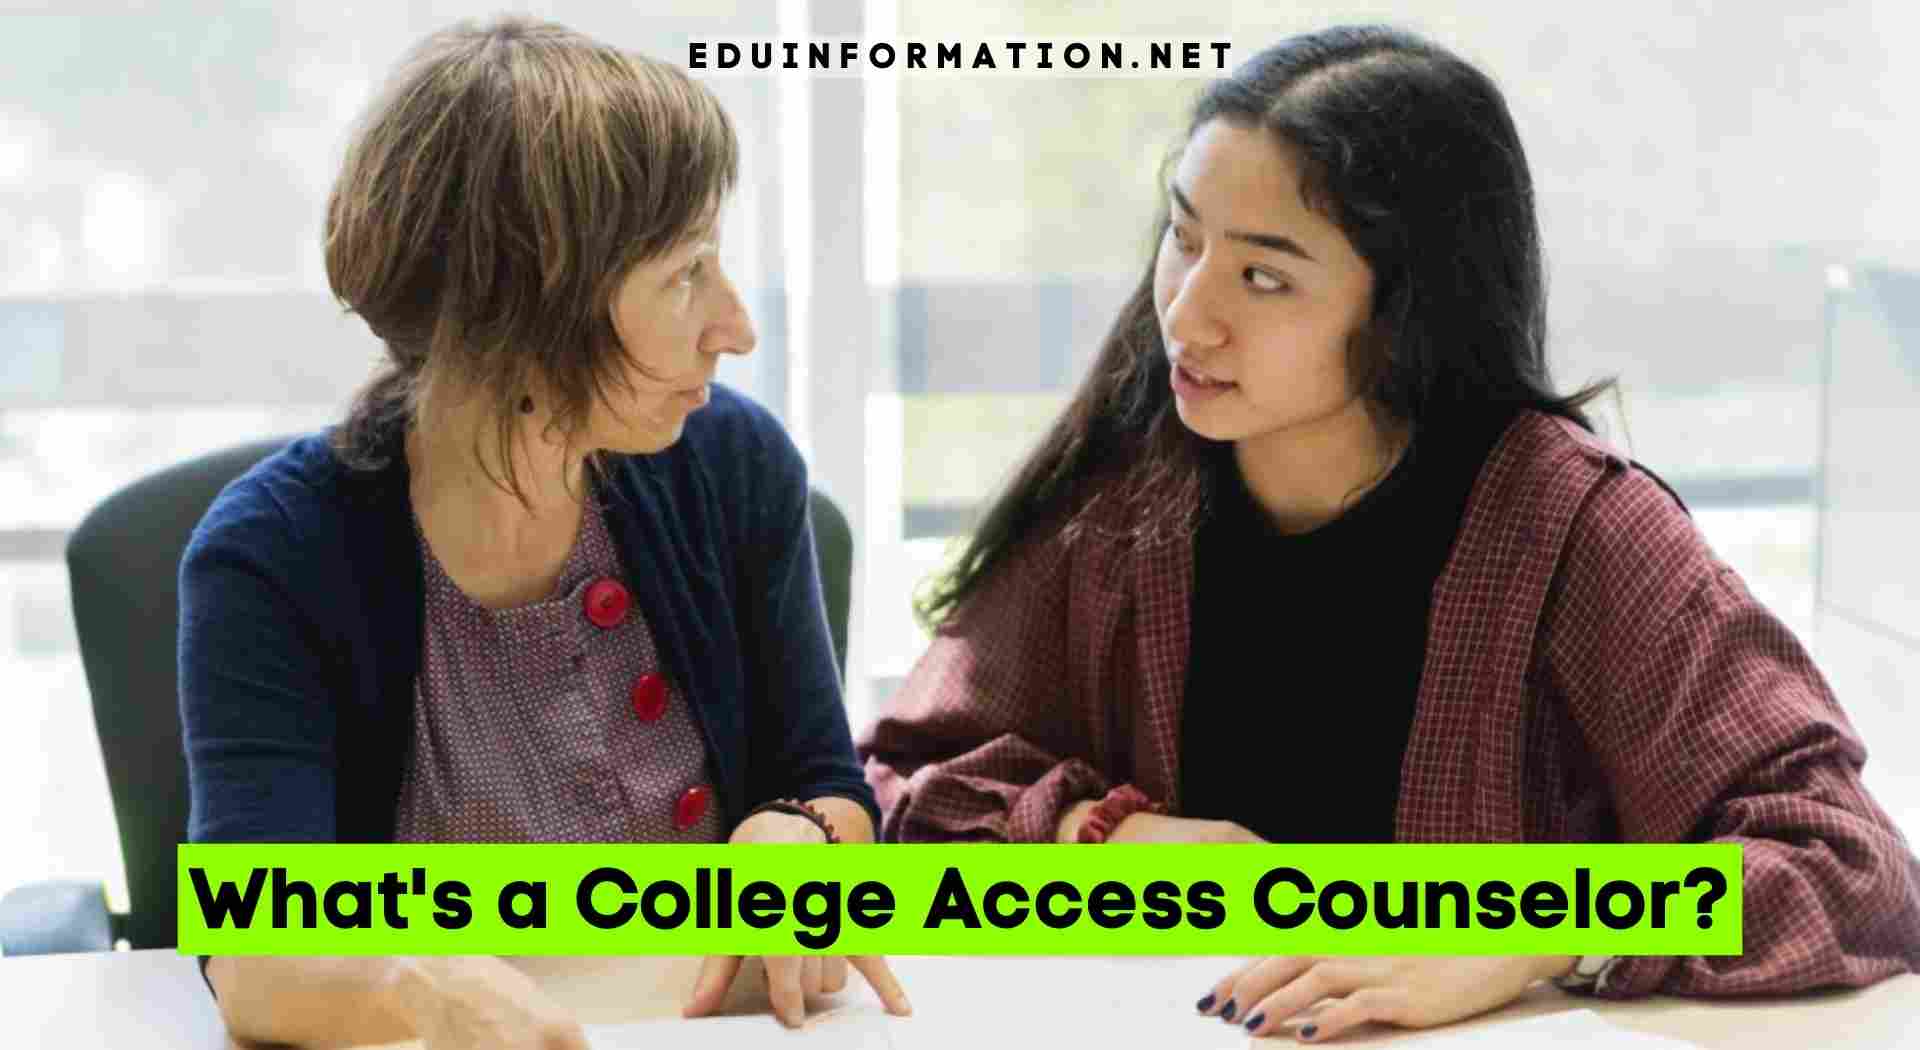 What's a College Access Counselor?